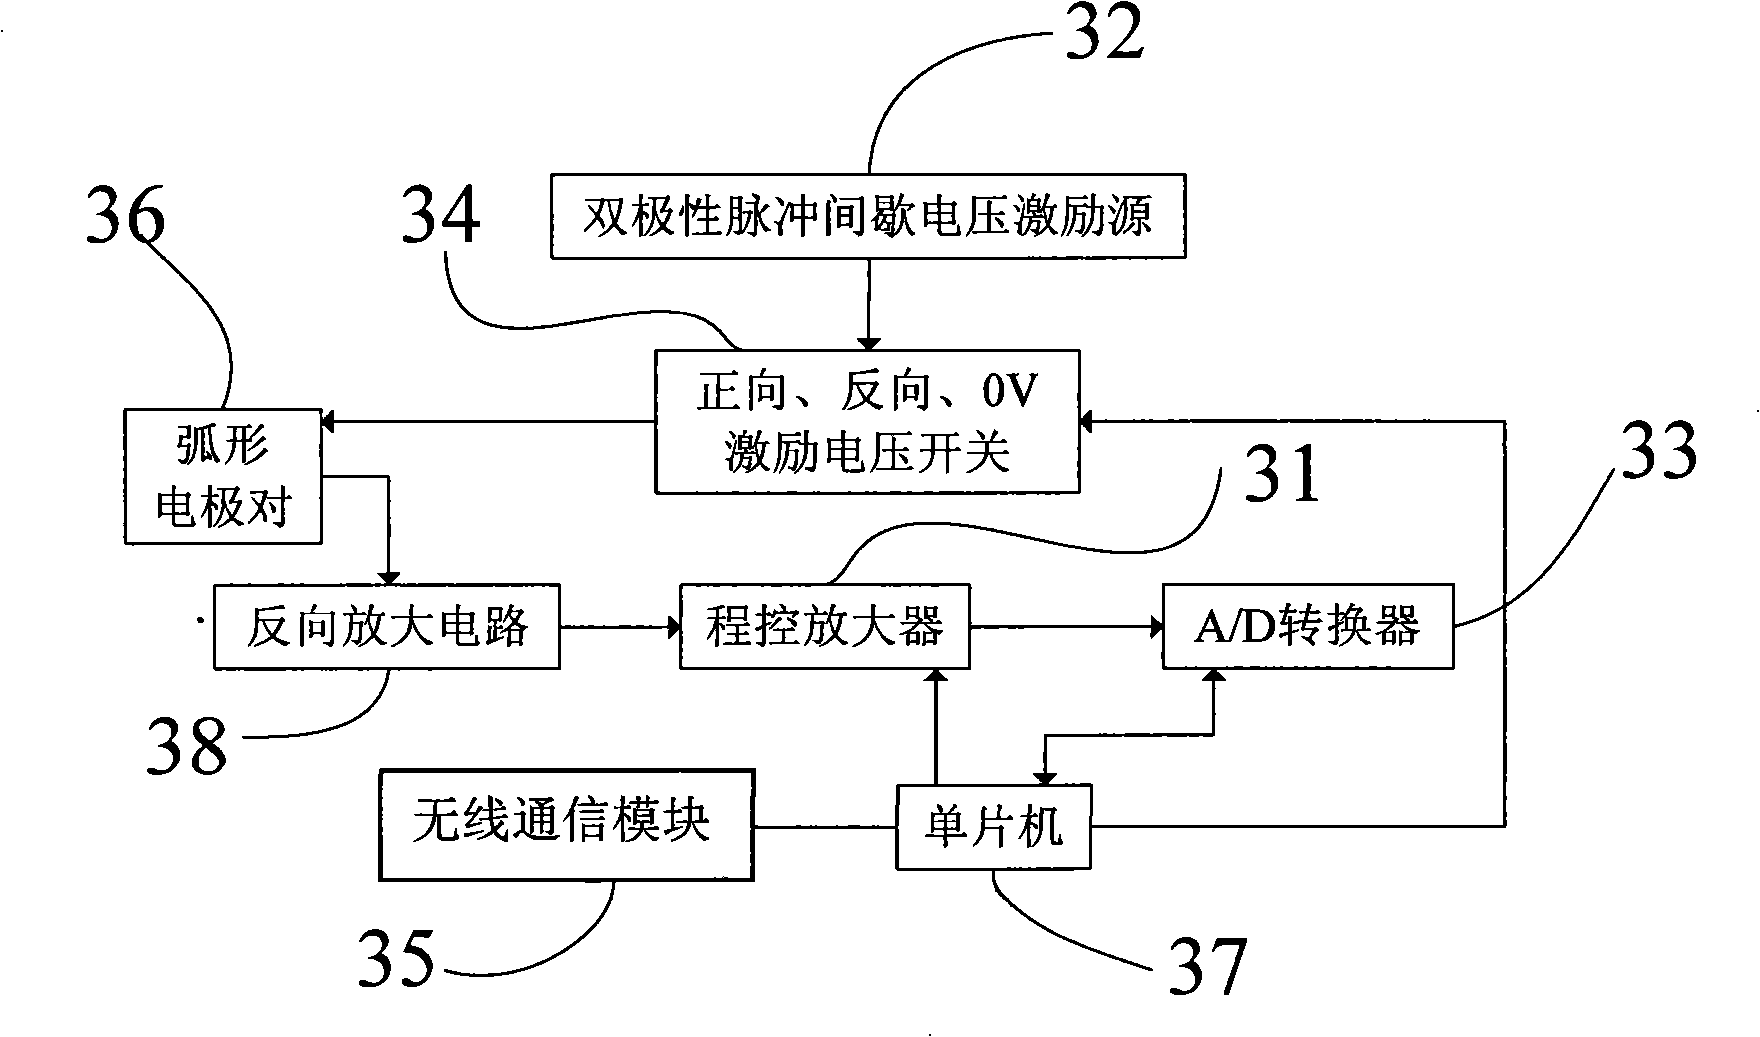 Soil water content monitoring instrument based on embedded system